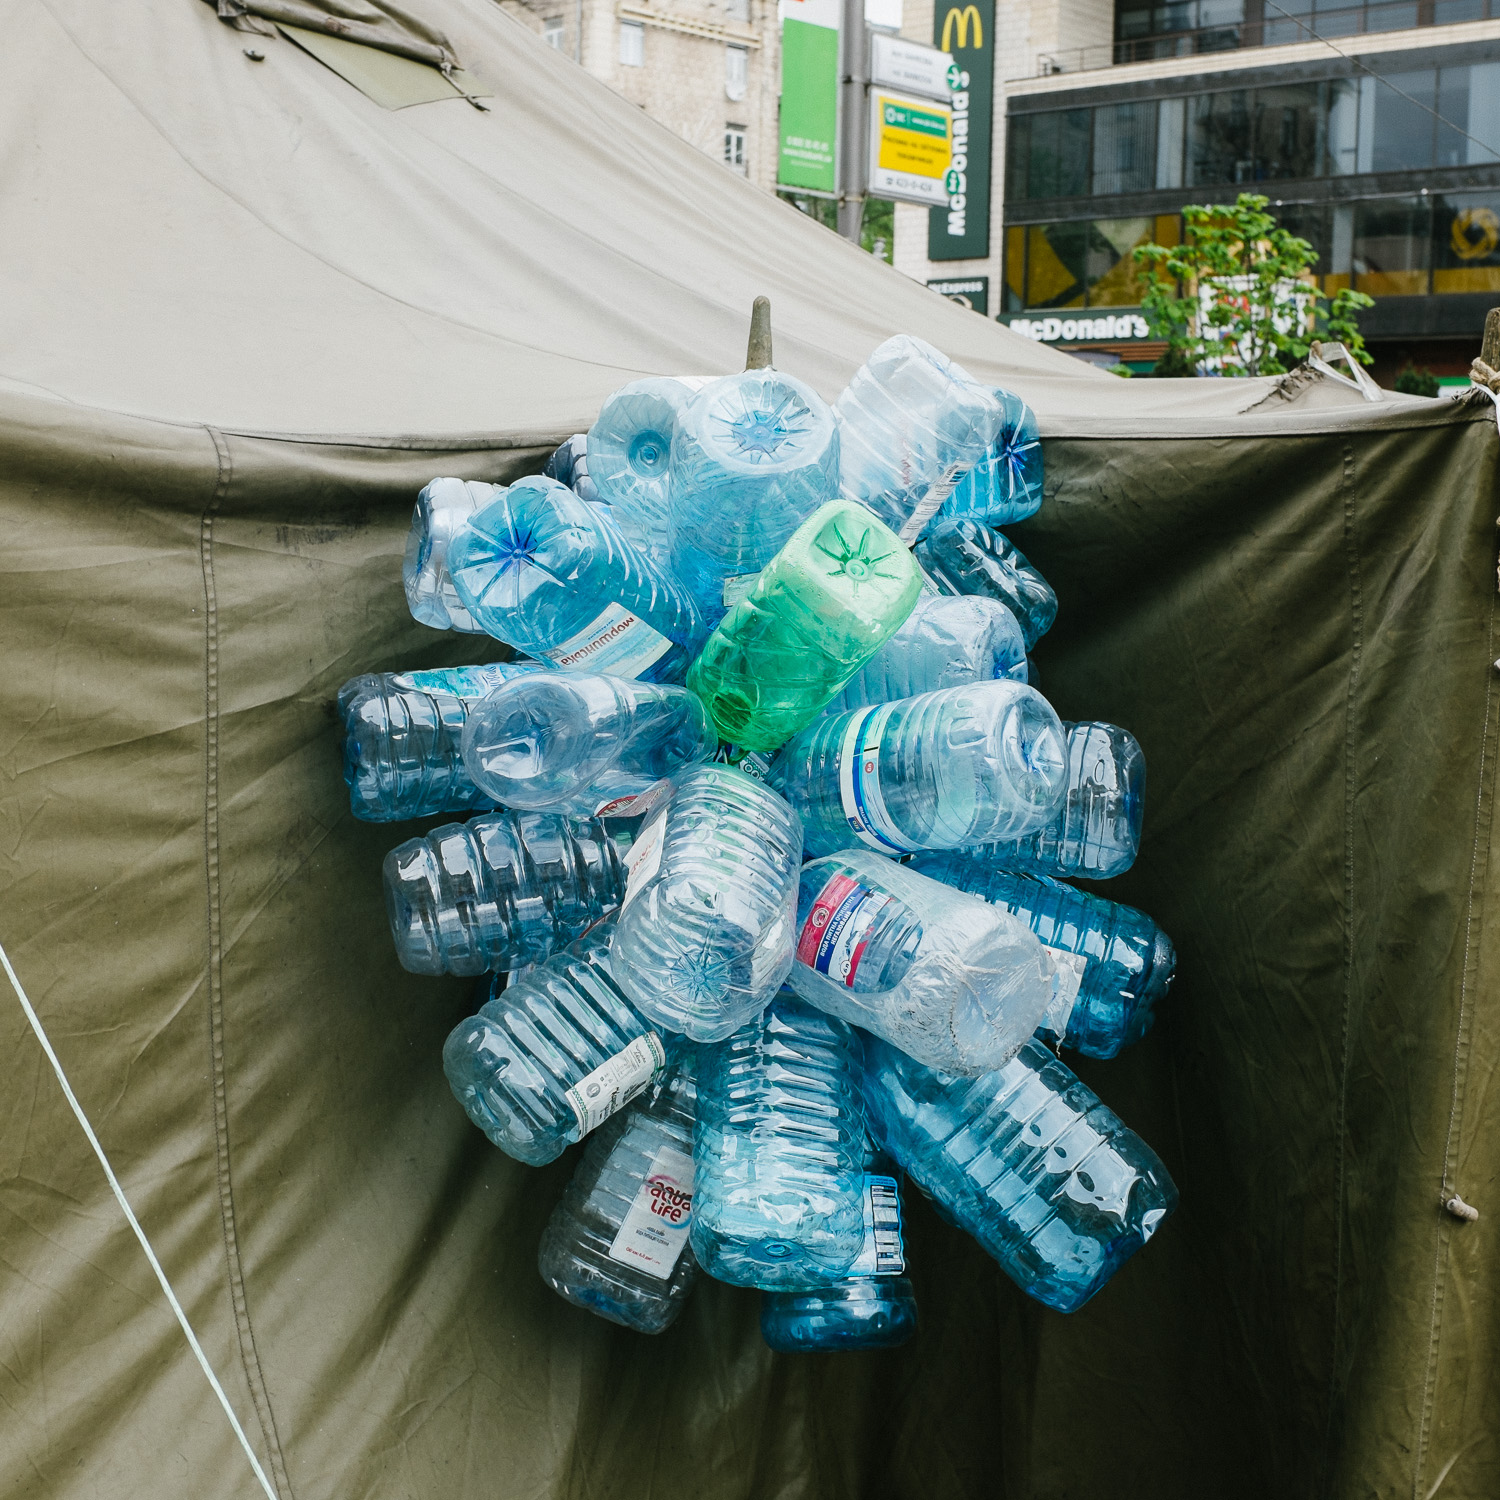  Empty water bottles outside a tent pitched on Khreshchatyk street, off Kyiv's Independence Square, April 2014. 